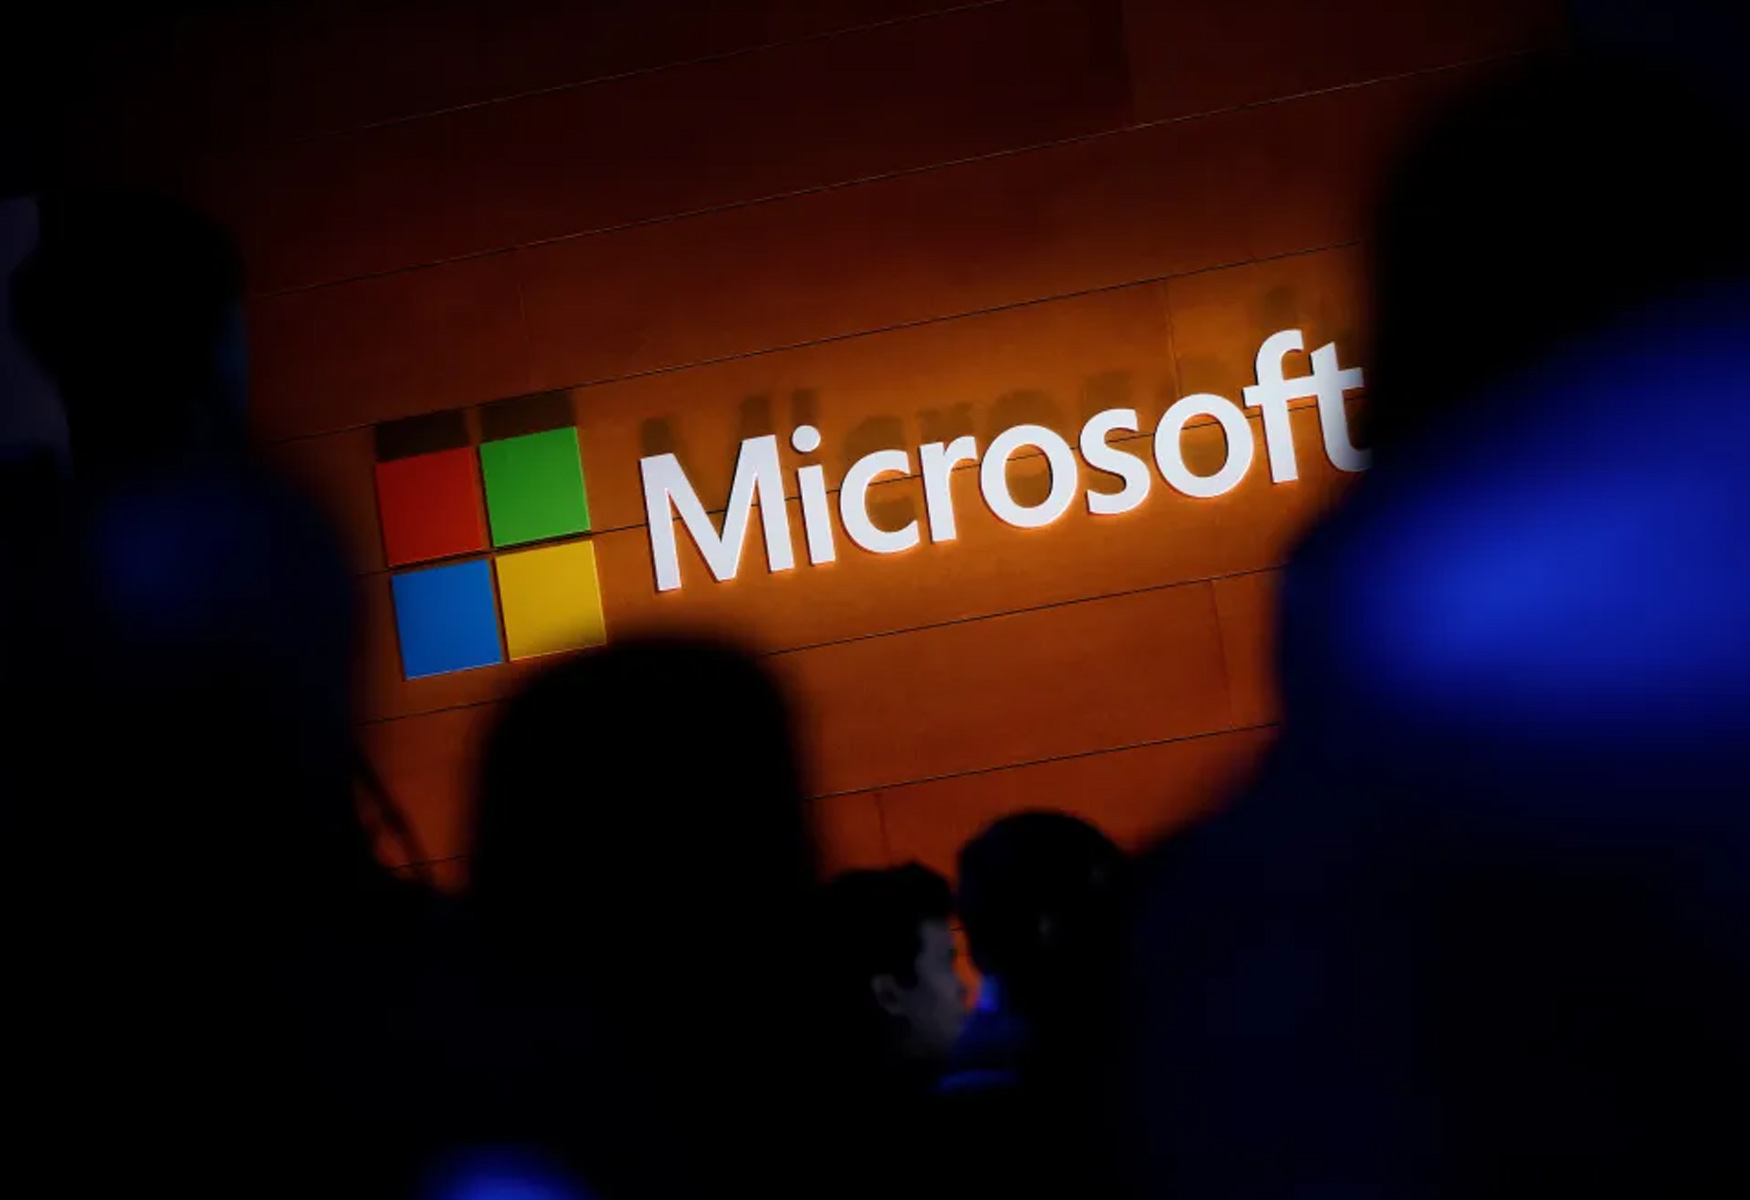 Microsoft Dismantles Cybercrime Operation Selling Fraudulent Accounts To Notorious Hacking Gang